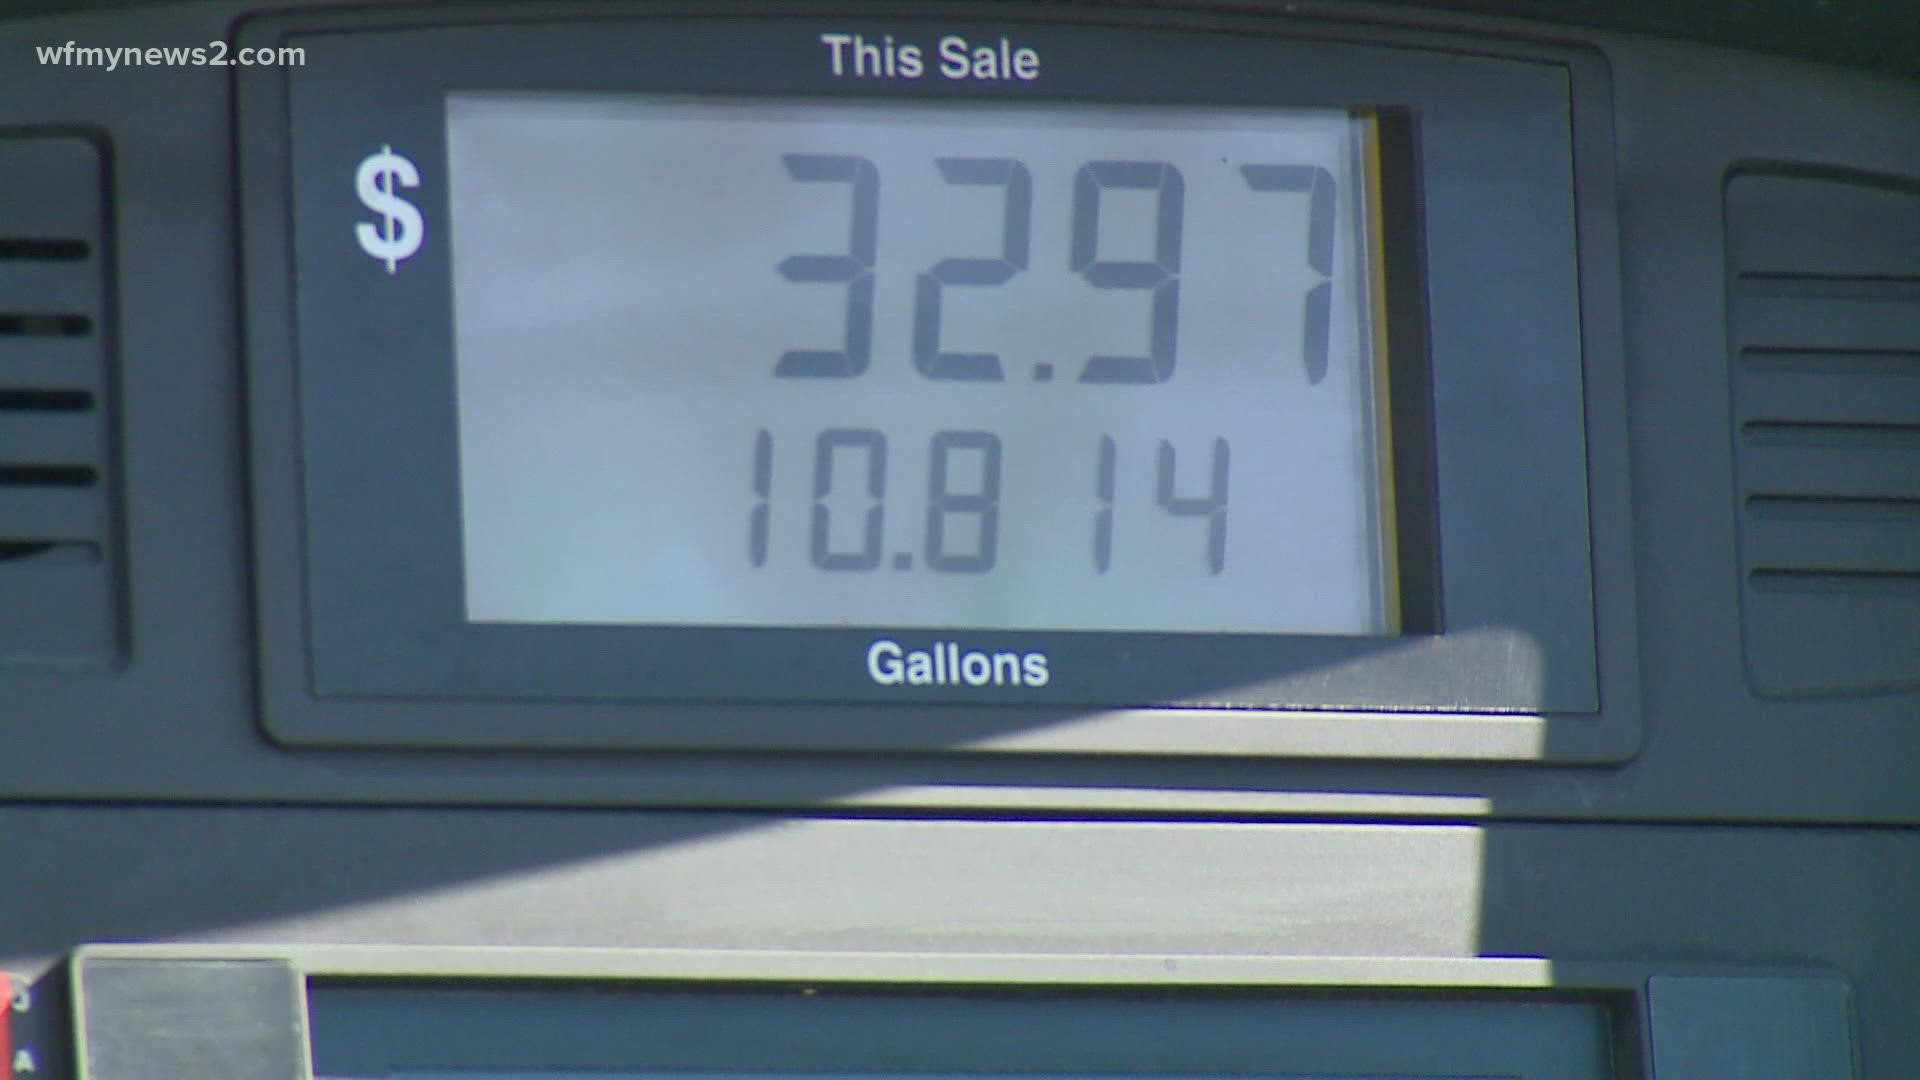 Experts say using the Strategic Petroleum Reserve has historically dropped gas prices between $2-$10.